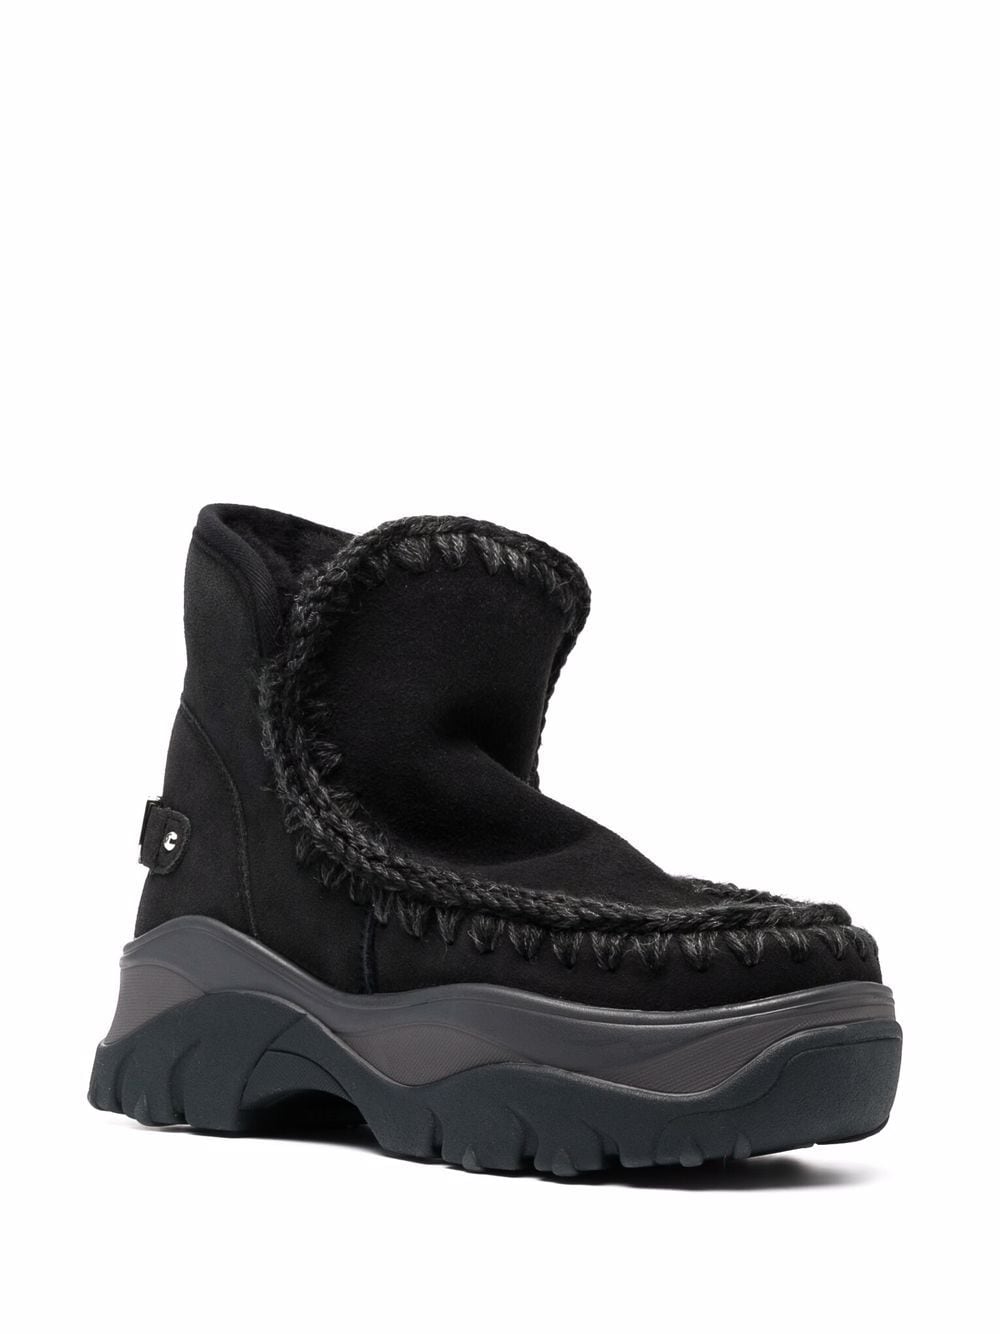  Mou Chunky Snow Boots - Black 